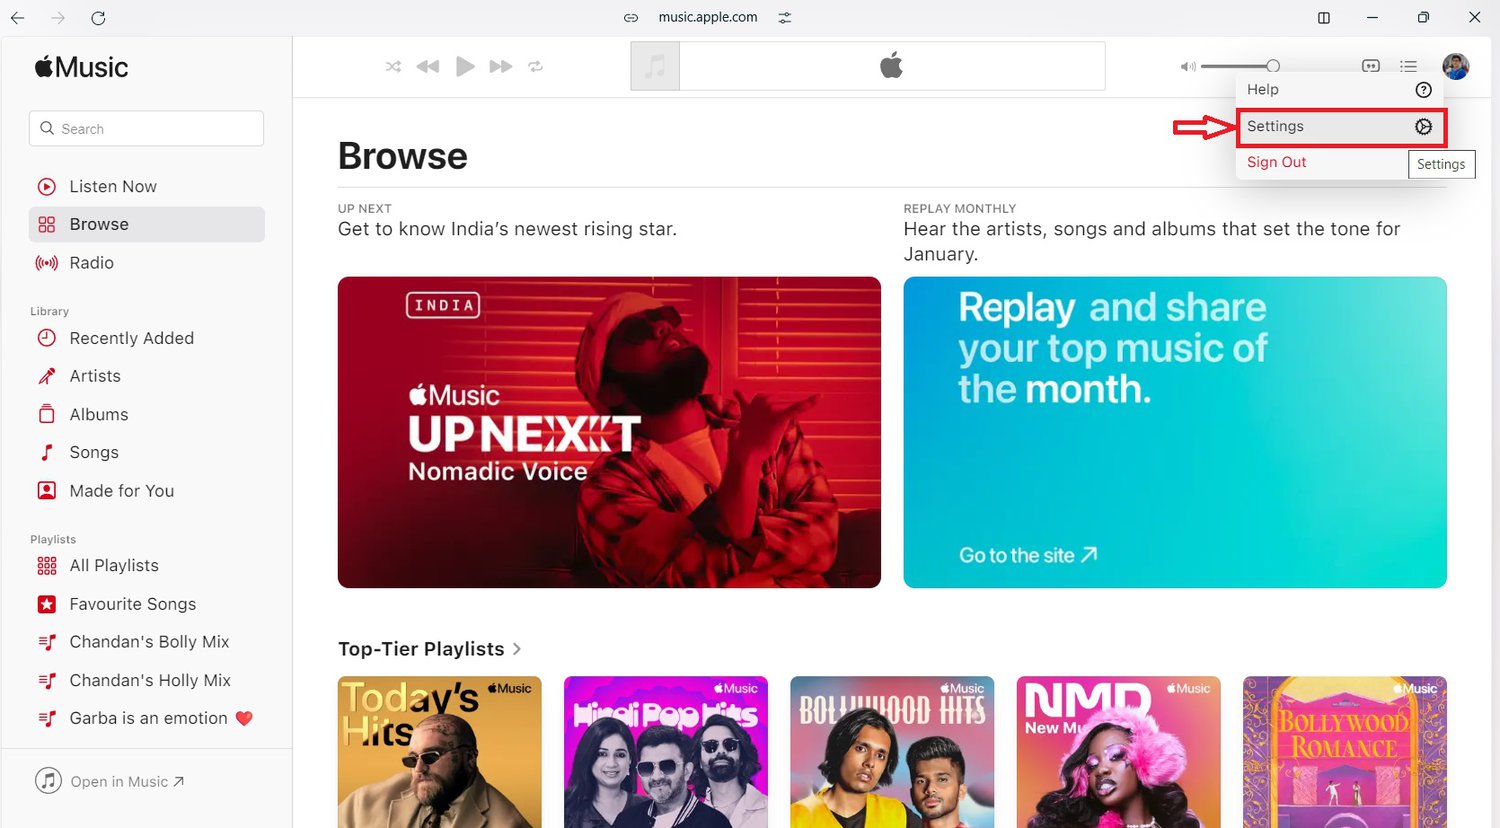 Steps to open settings in Apple Music